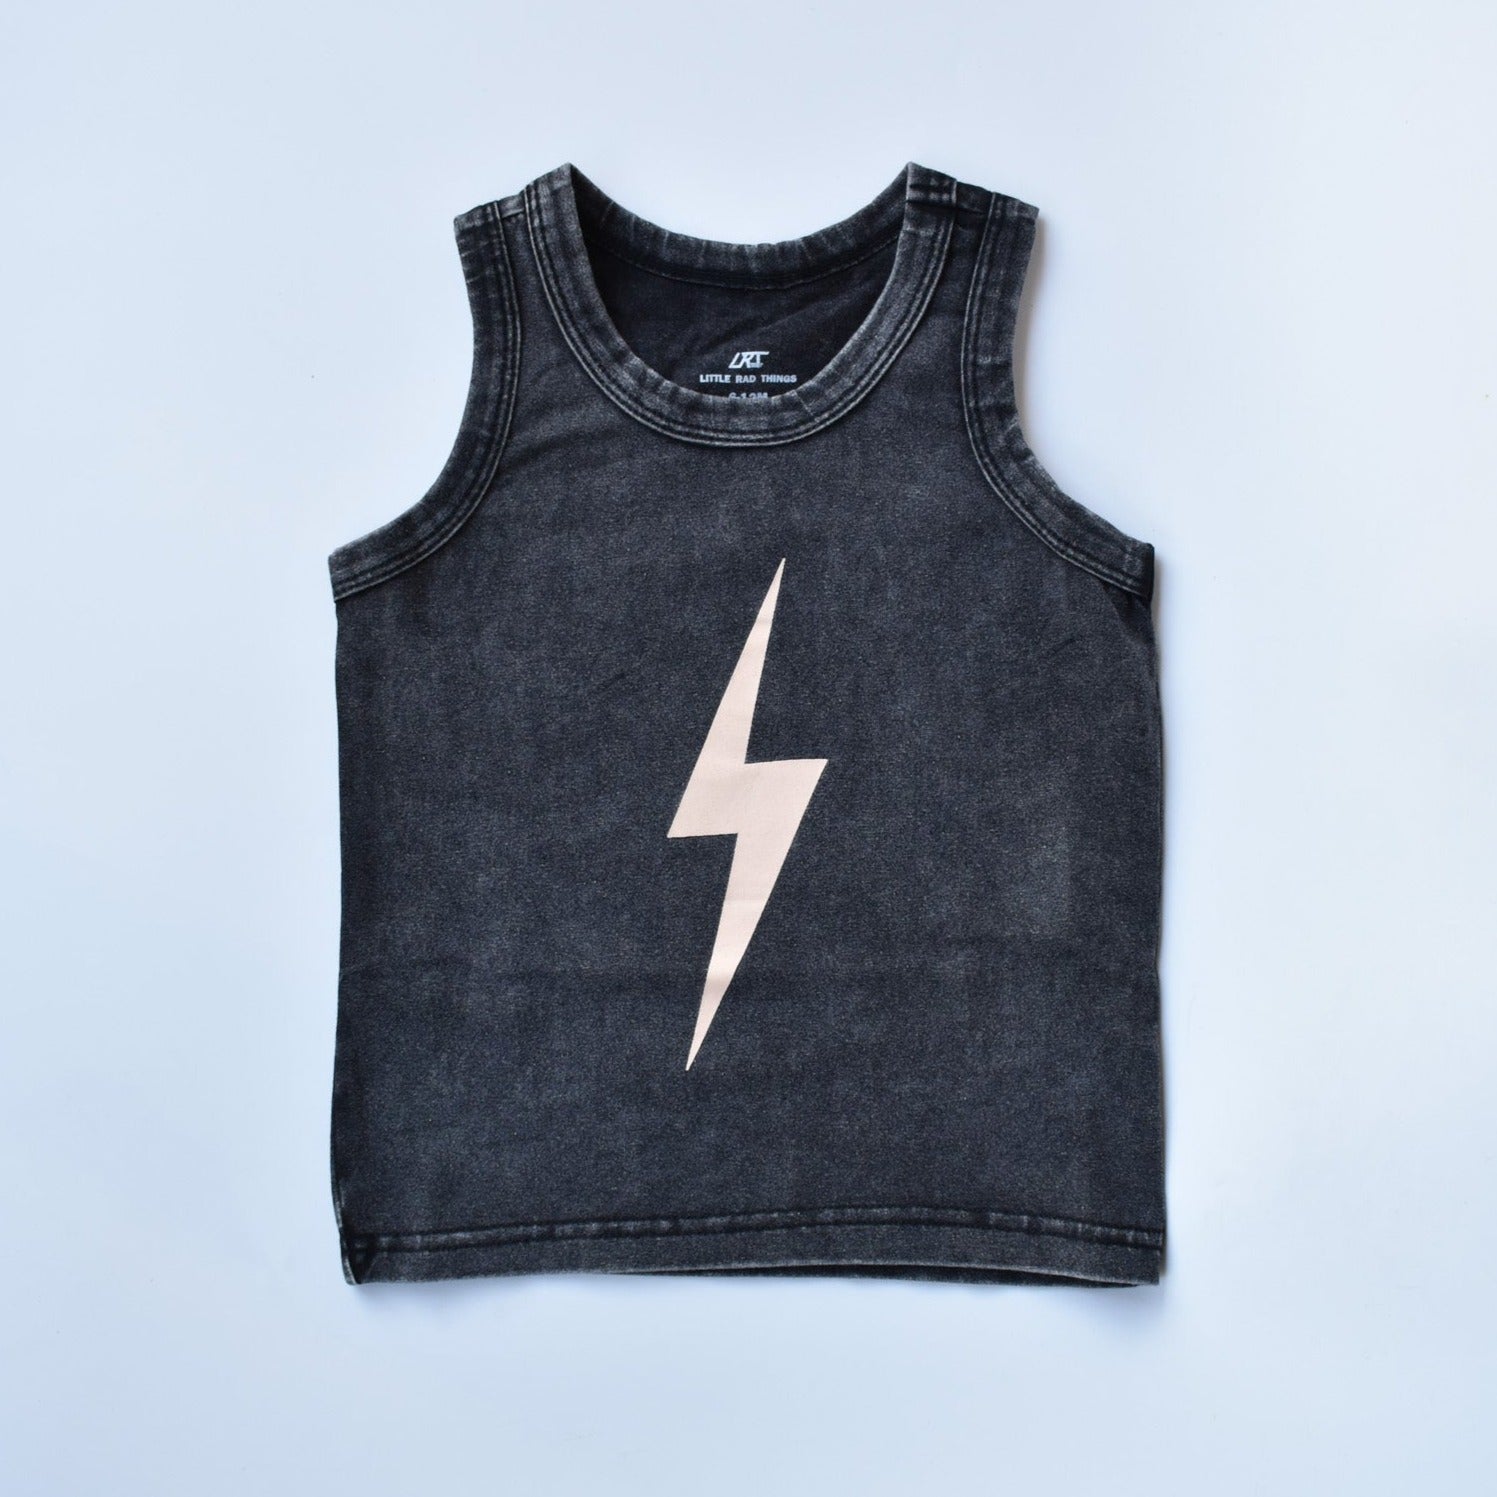 SPARK MUSCLE-TANK - VINTAGE BLACK - GRAPHIC TEES FOR BOYS - LITTLE RAD THINGS